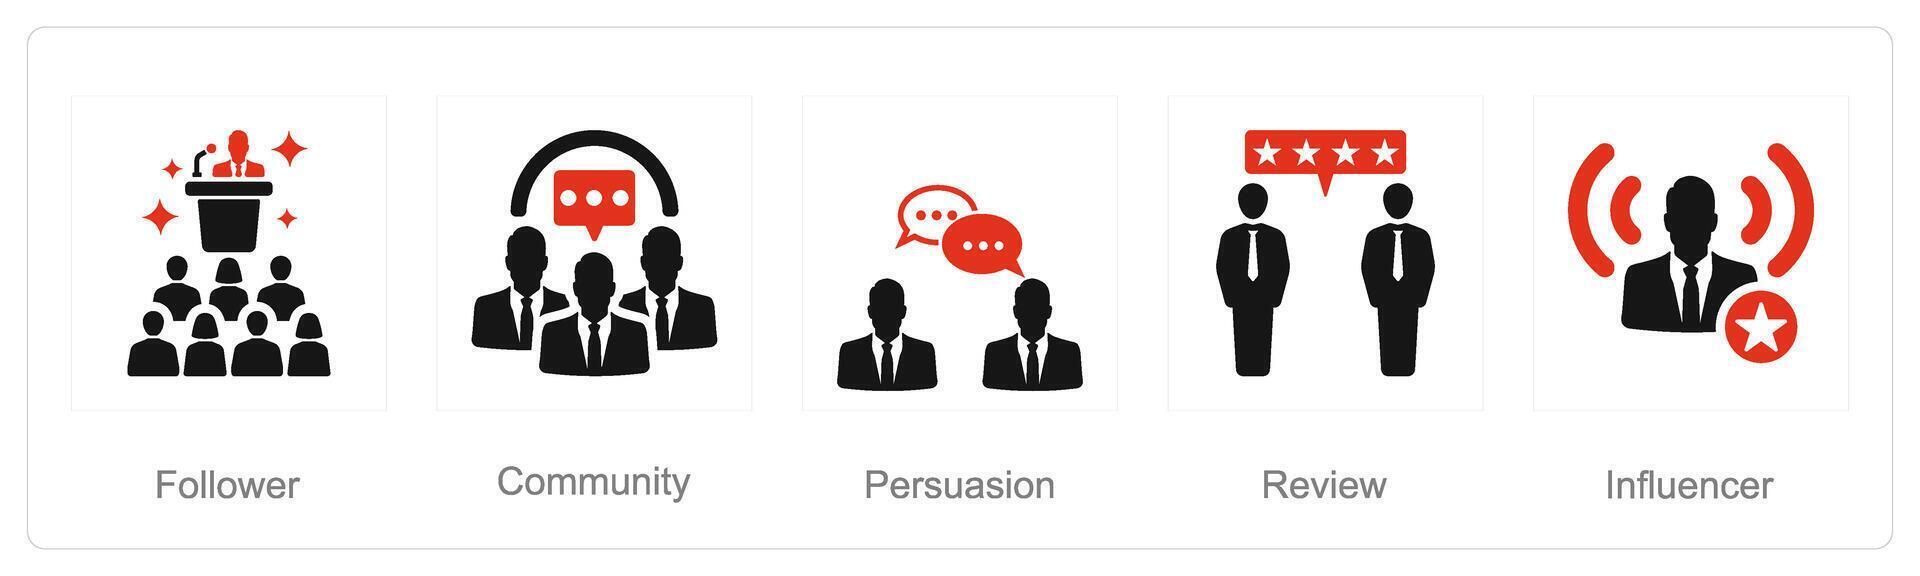 A set of 5 Influencer icons as follower, community, persuasion vector